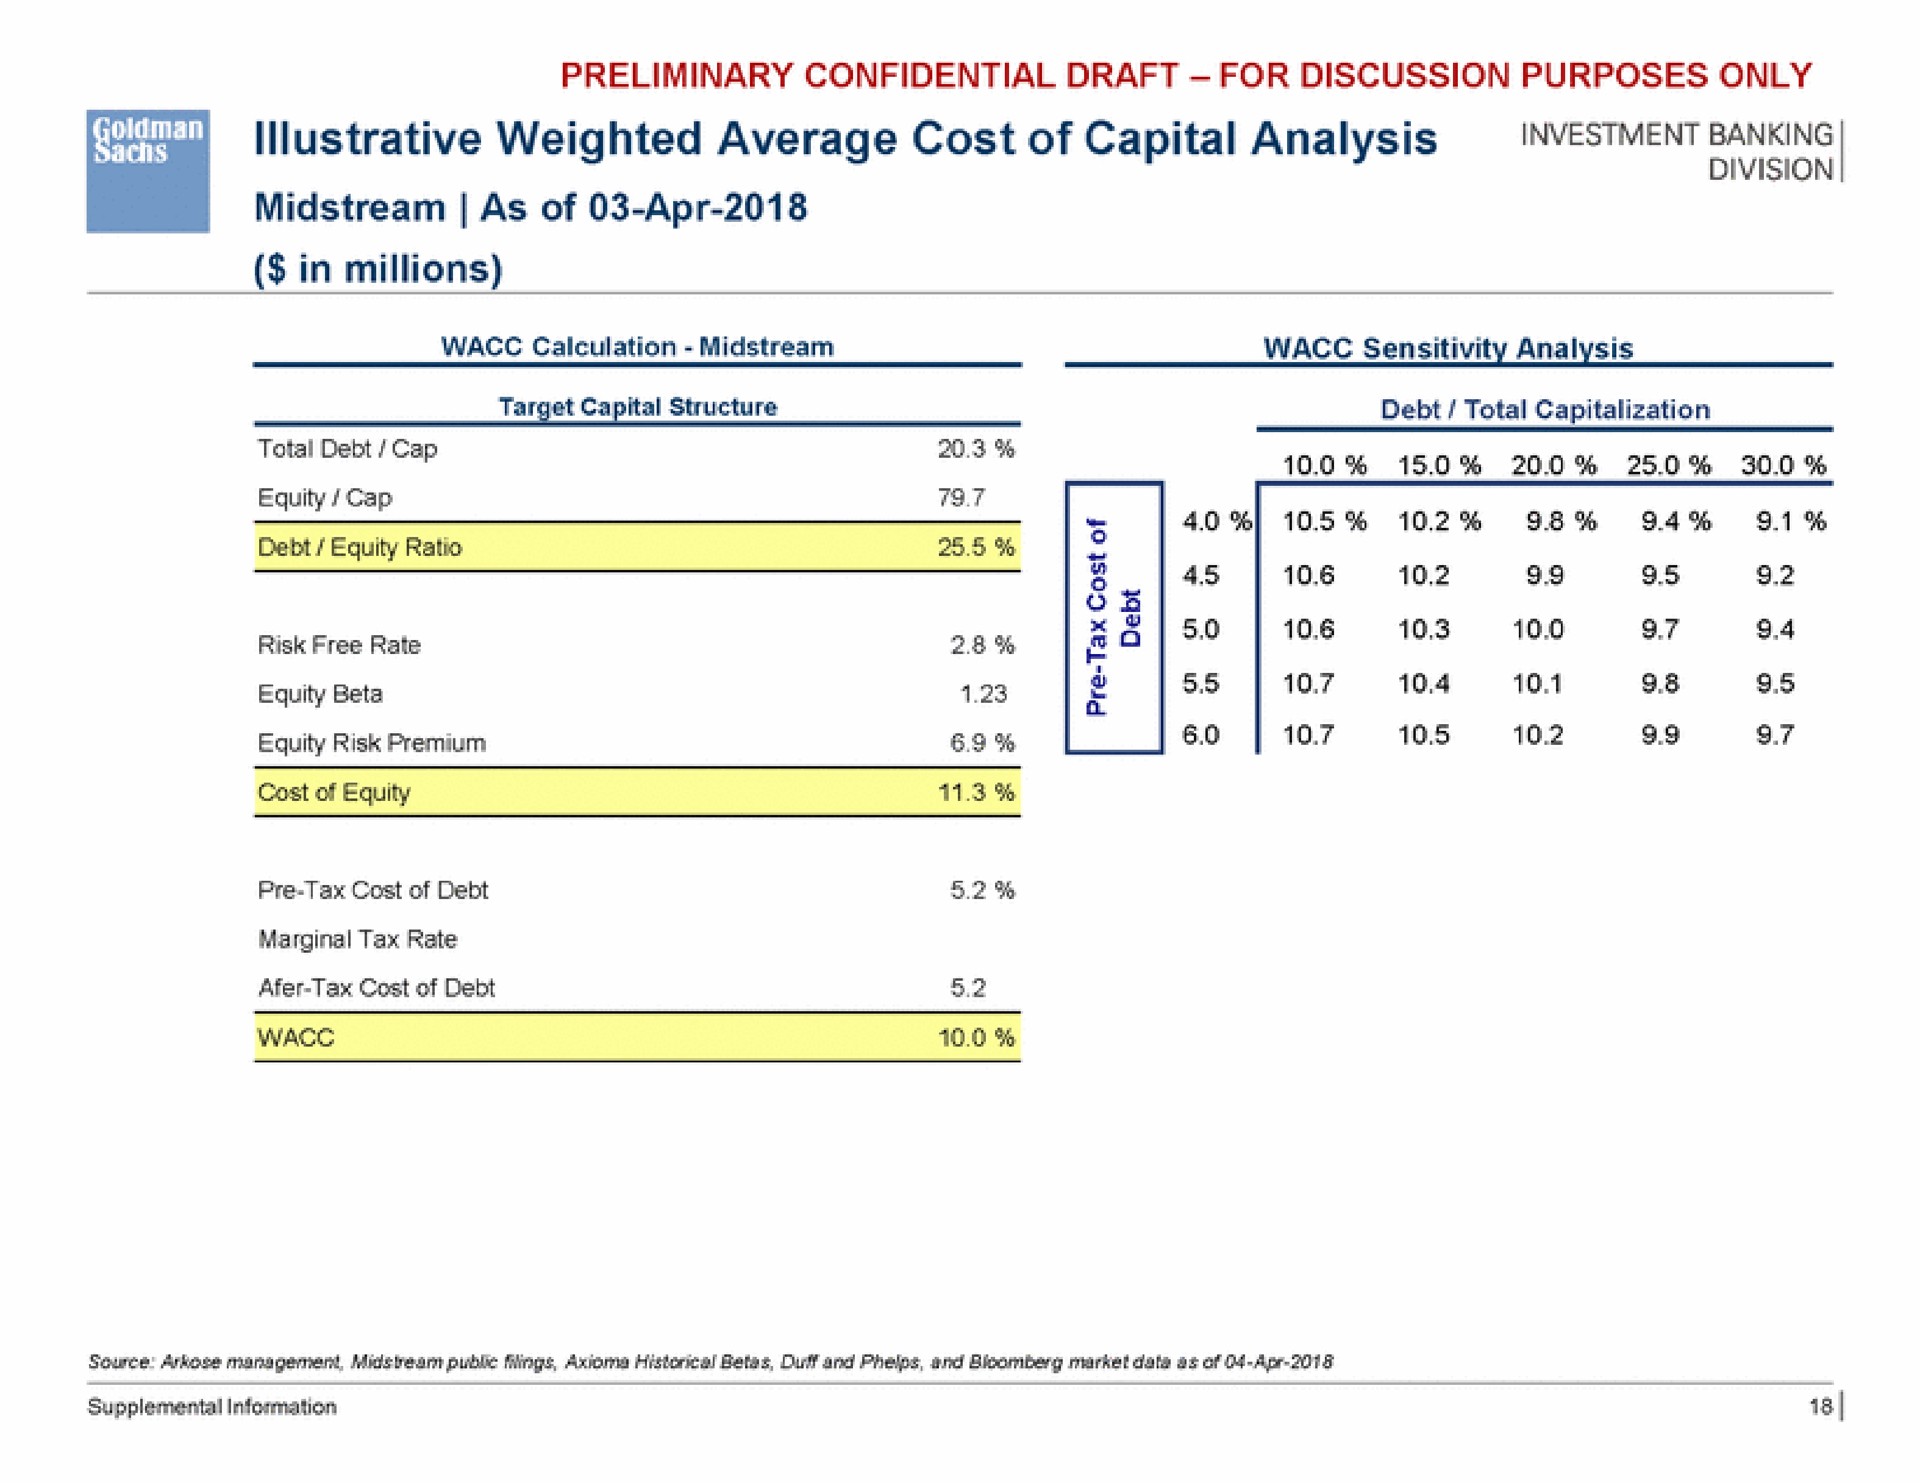 illustrative weighted average cost of capital analysis | Goldman Sachs